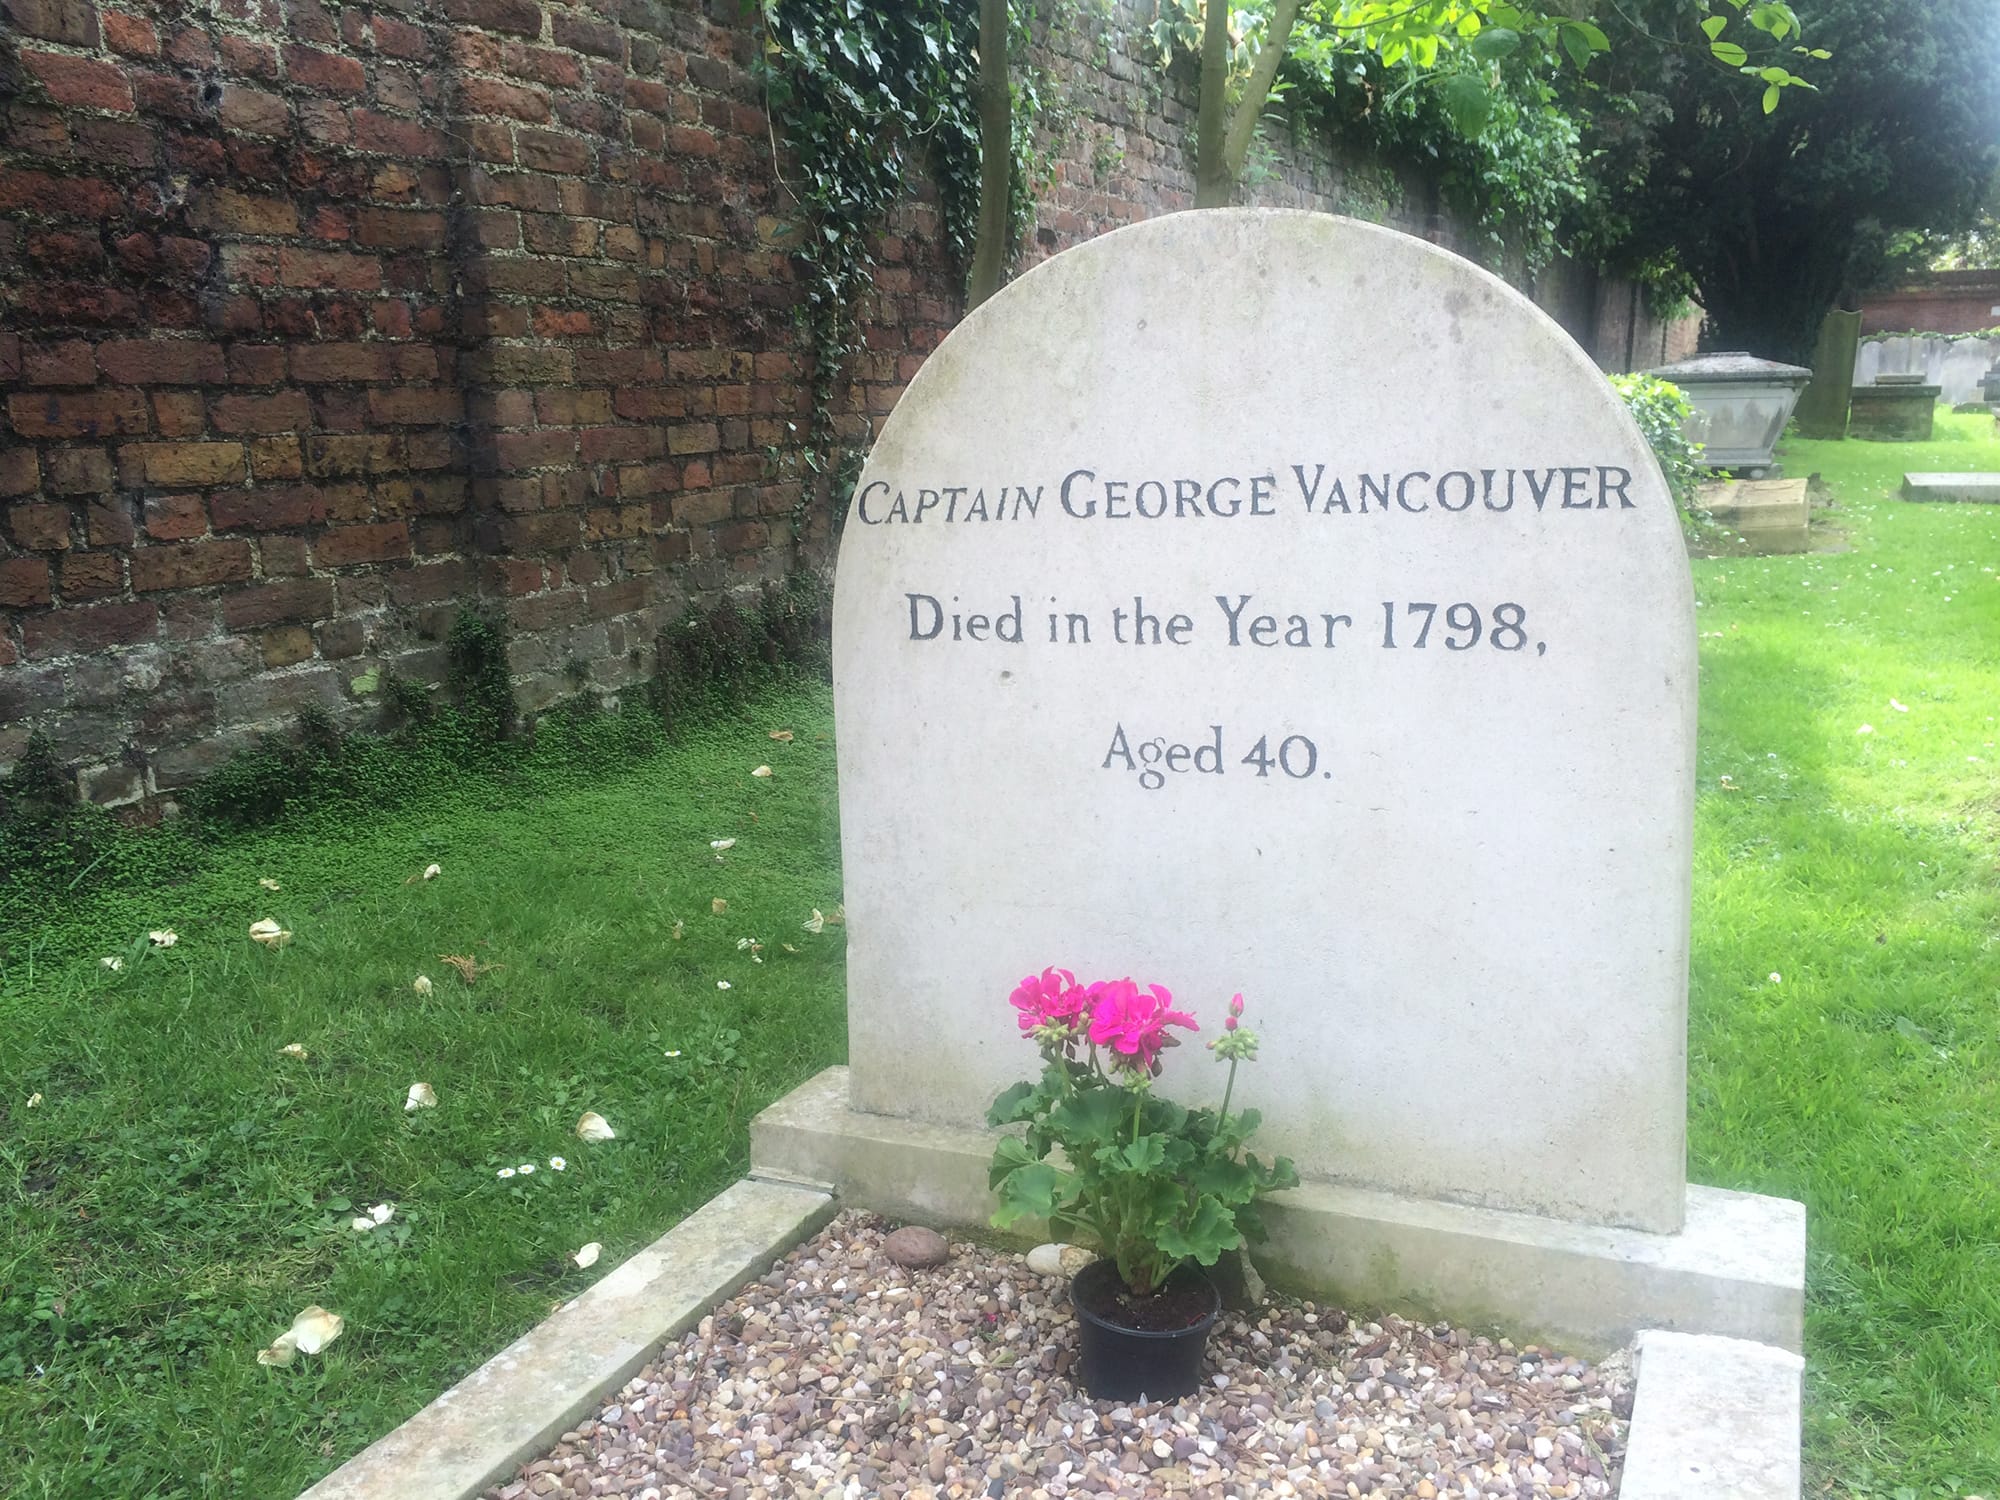 Our city is the namesake of the man who's buried in this modest grave near London.